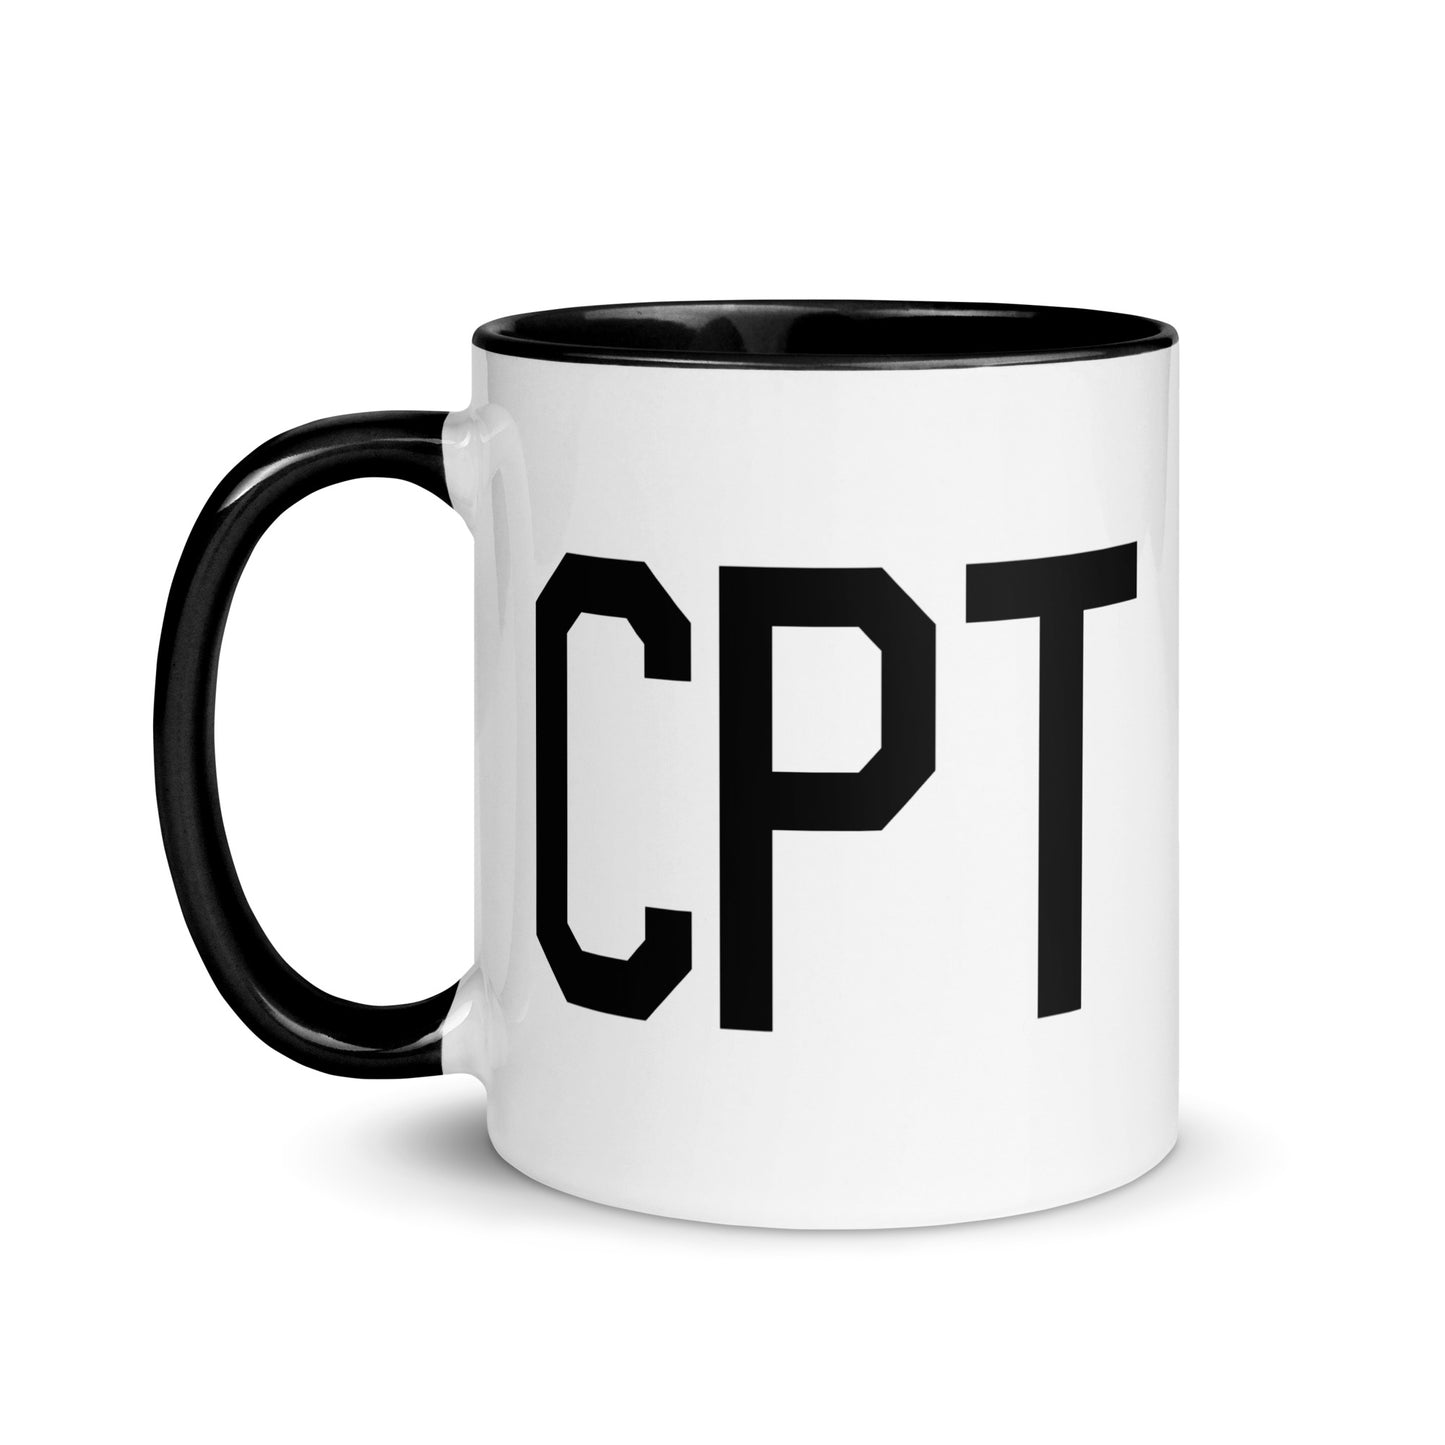 Airport Code Coffee Mug - Black • CPT Cape Town • YHM Designs - Image 03